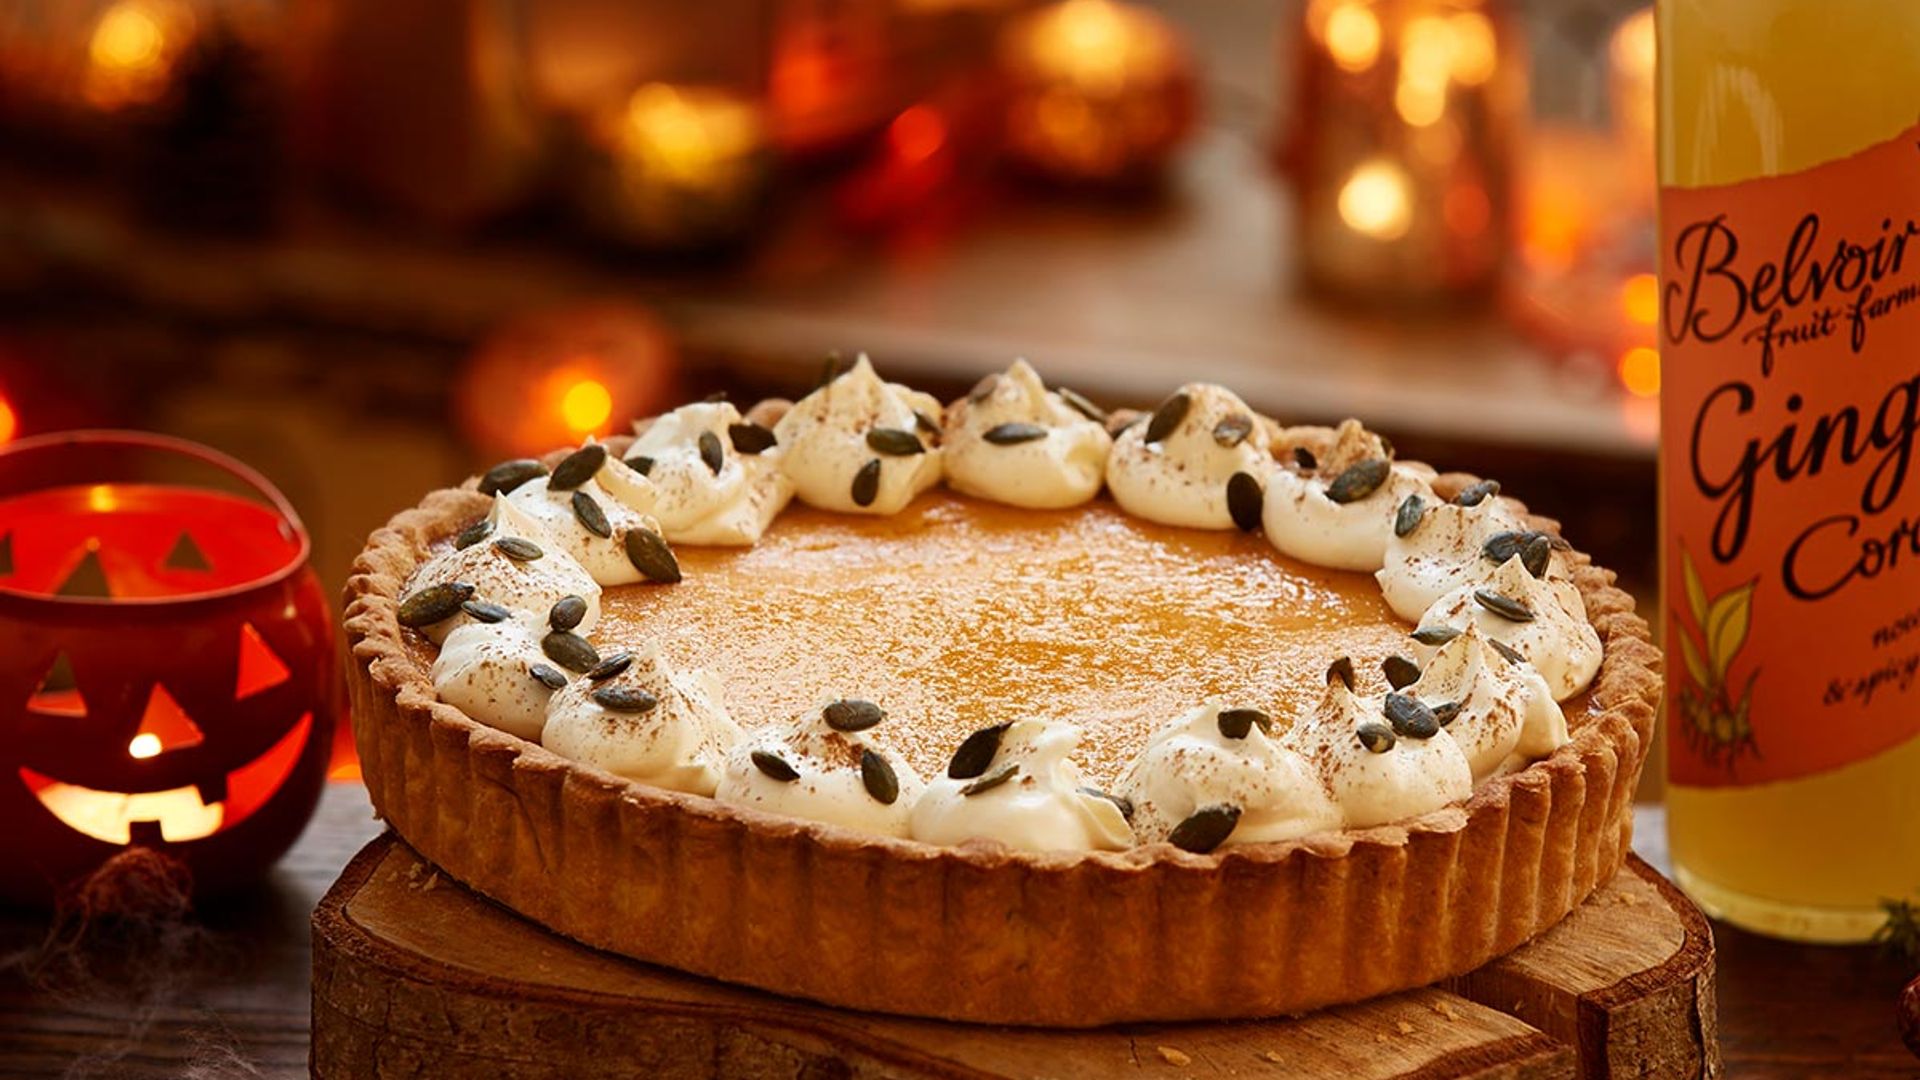 Put those pesky pumpkins to good use this Halloween with the ULTIMATE spiced pumpkin pie recipe!